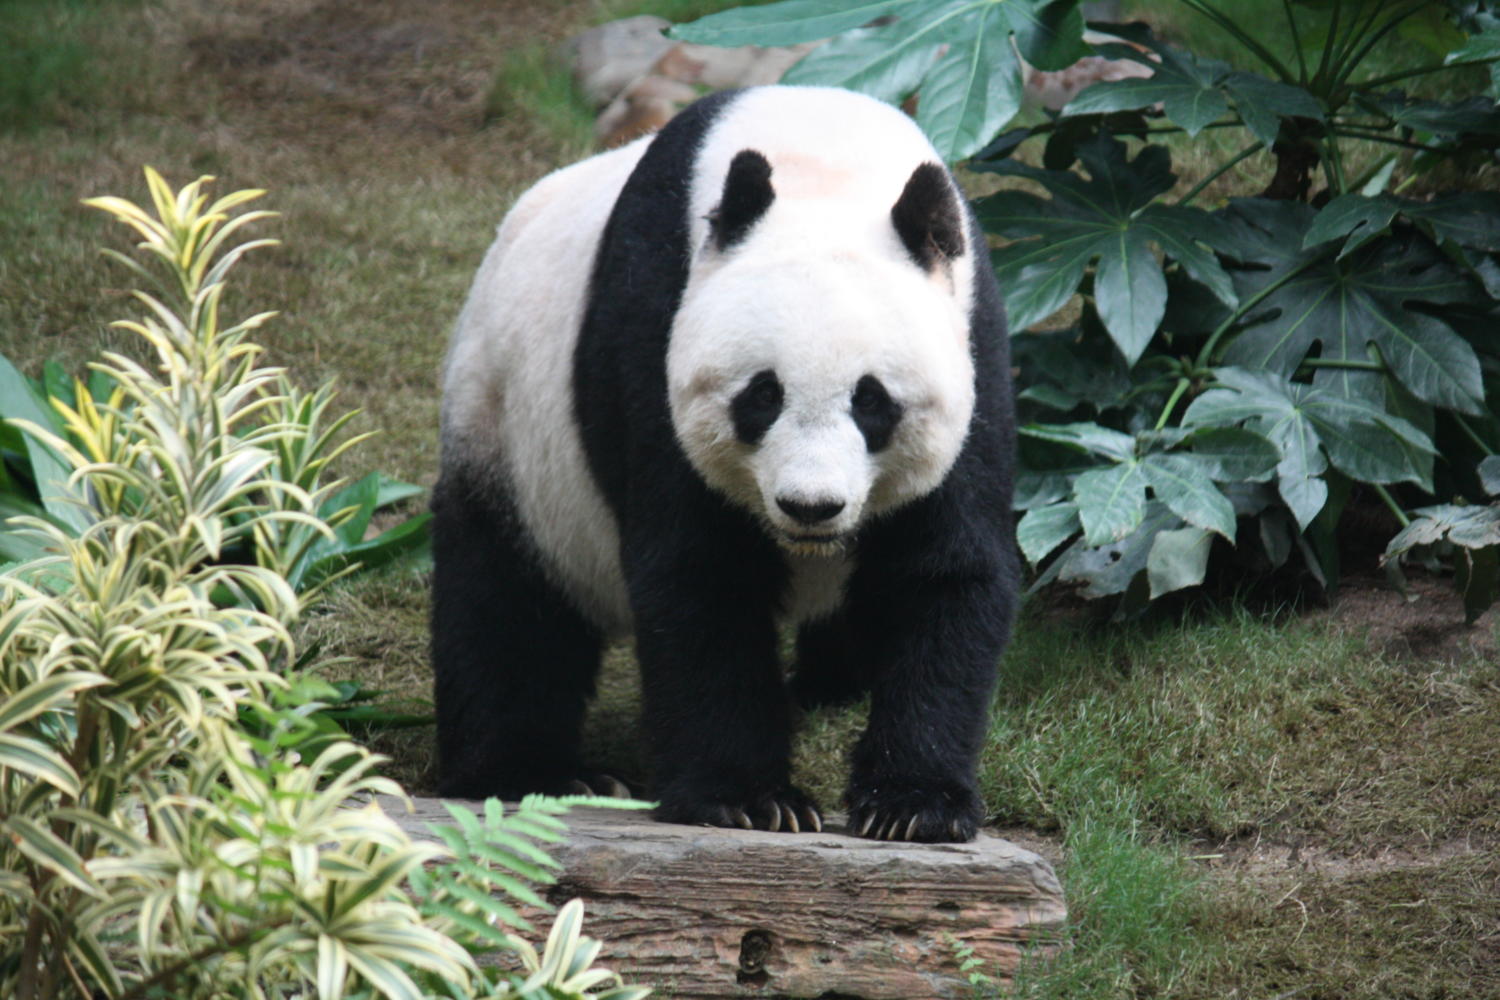 A giant panda living in a reserve.